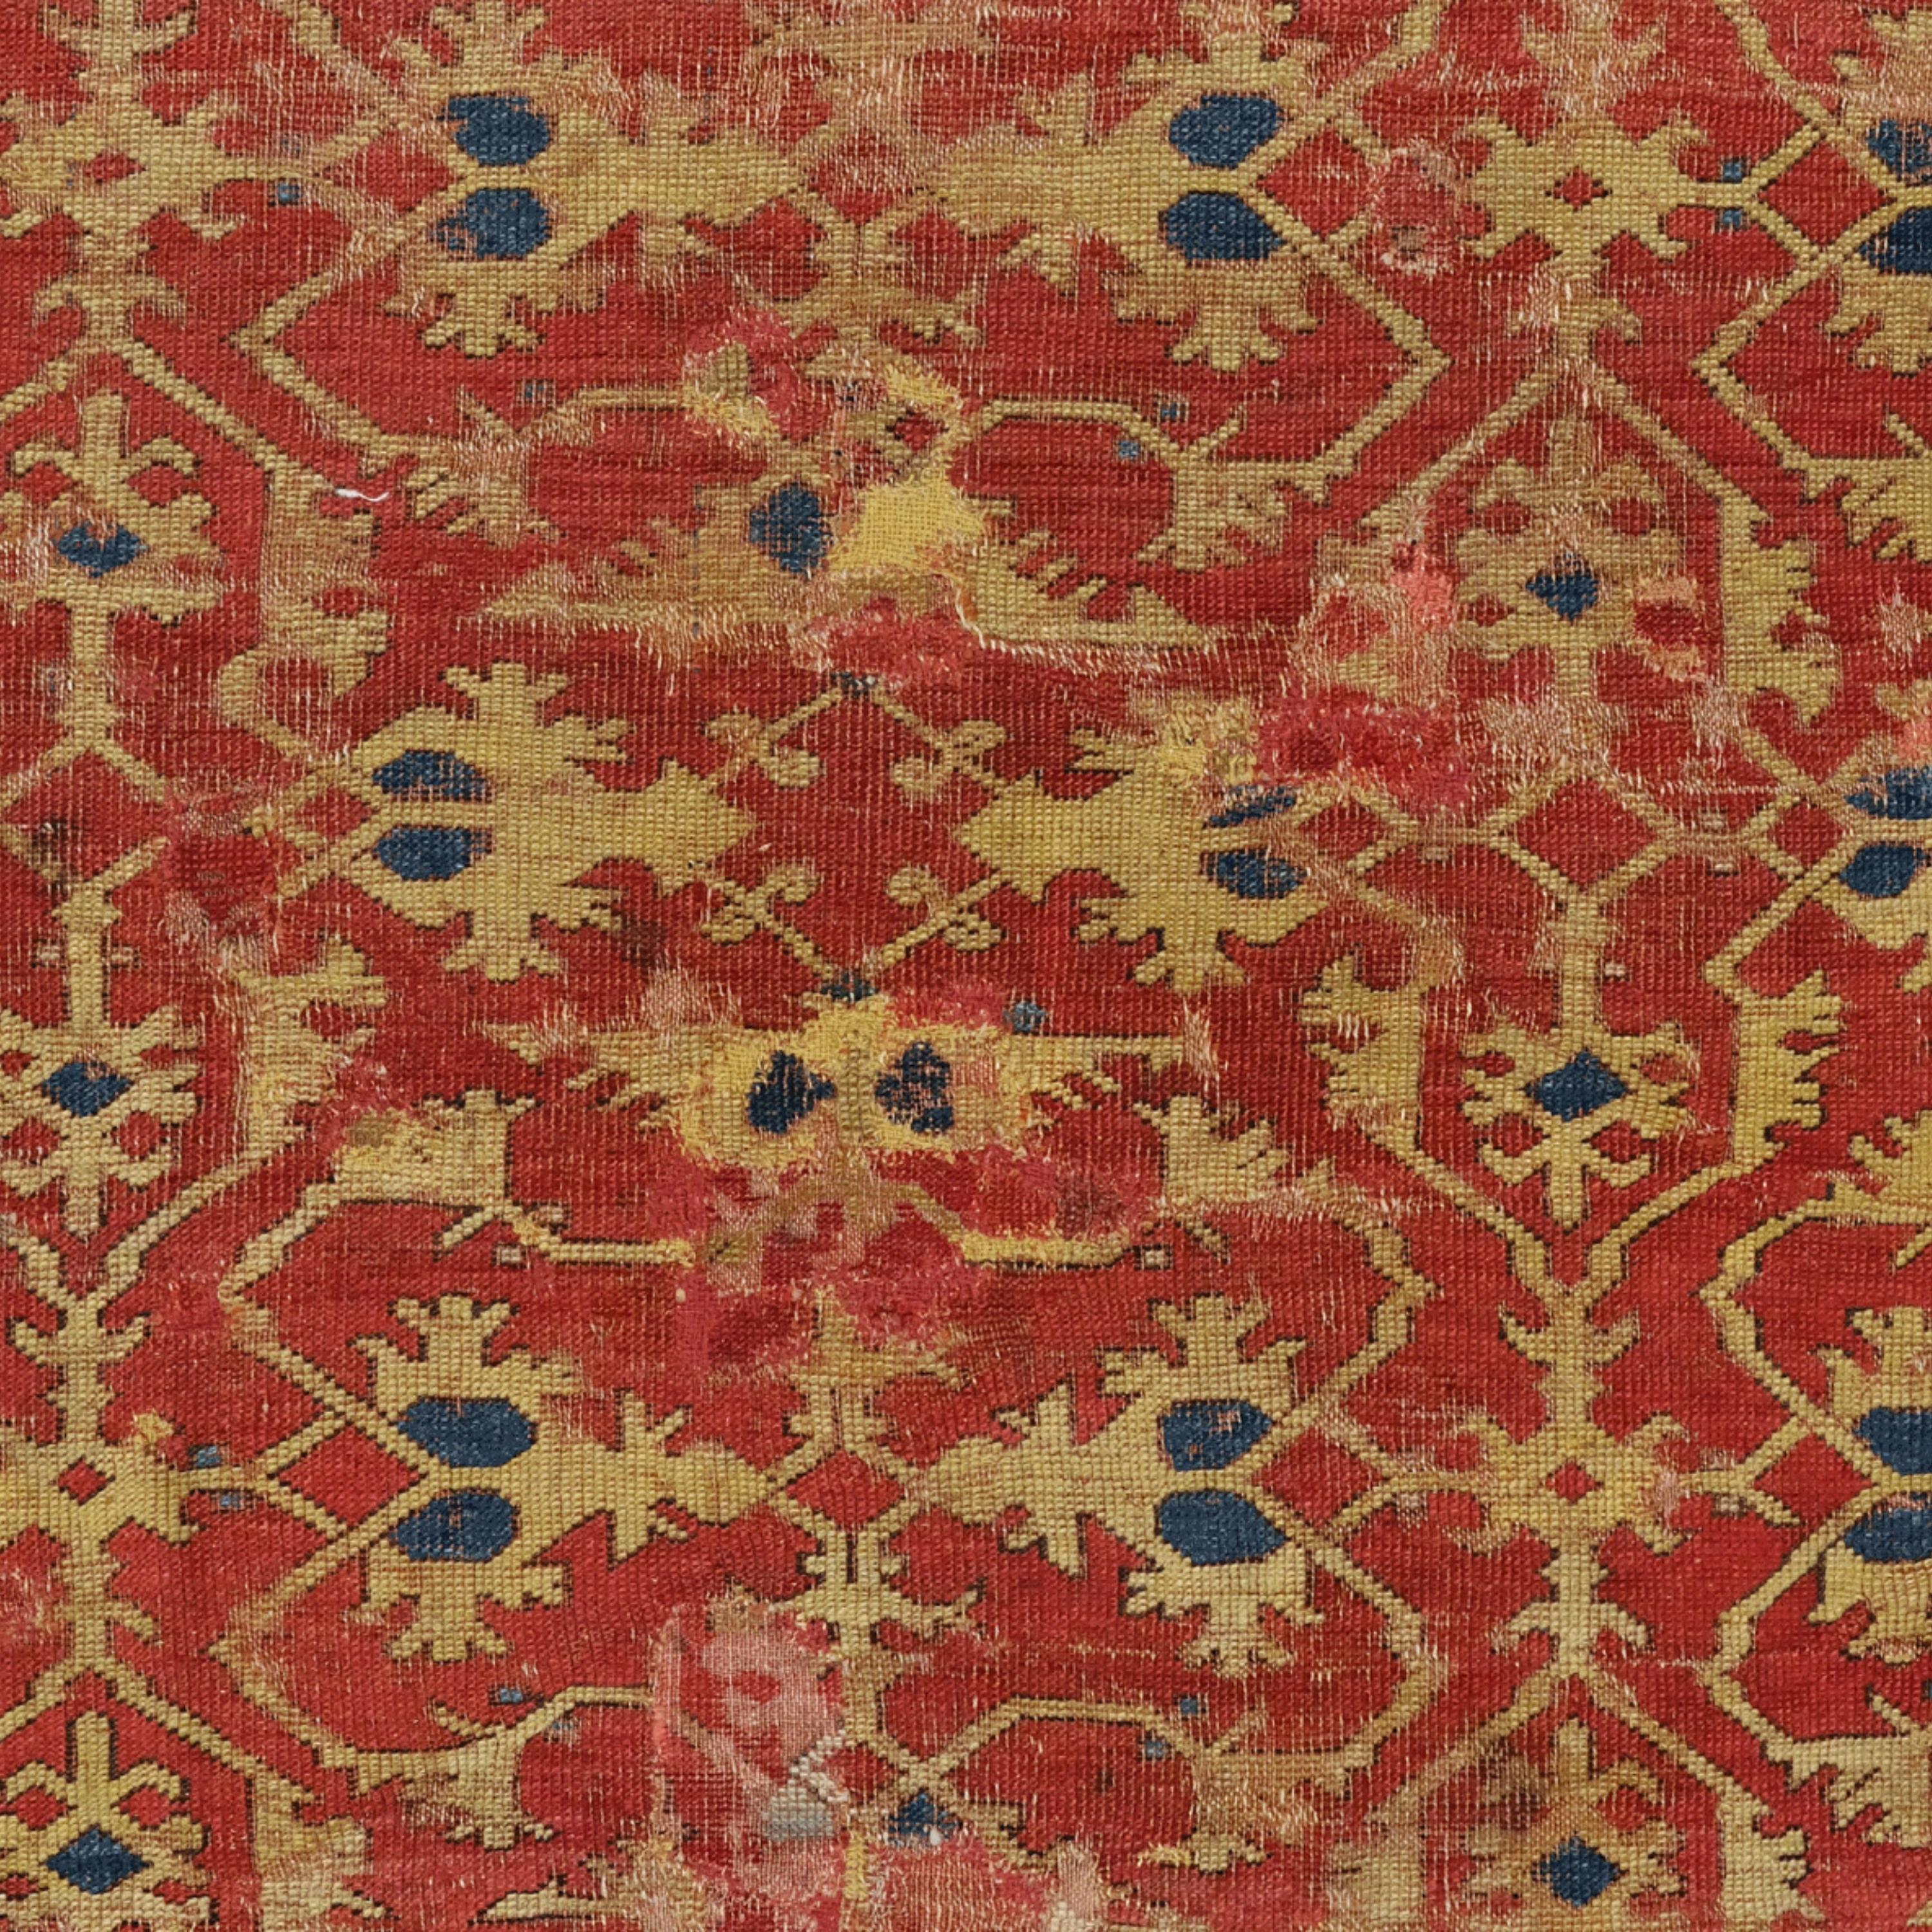 Turkish Early 17th Century Lotto Rug Fragment - Antique Fragment, Antique Rug For Sale